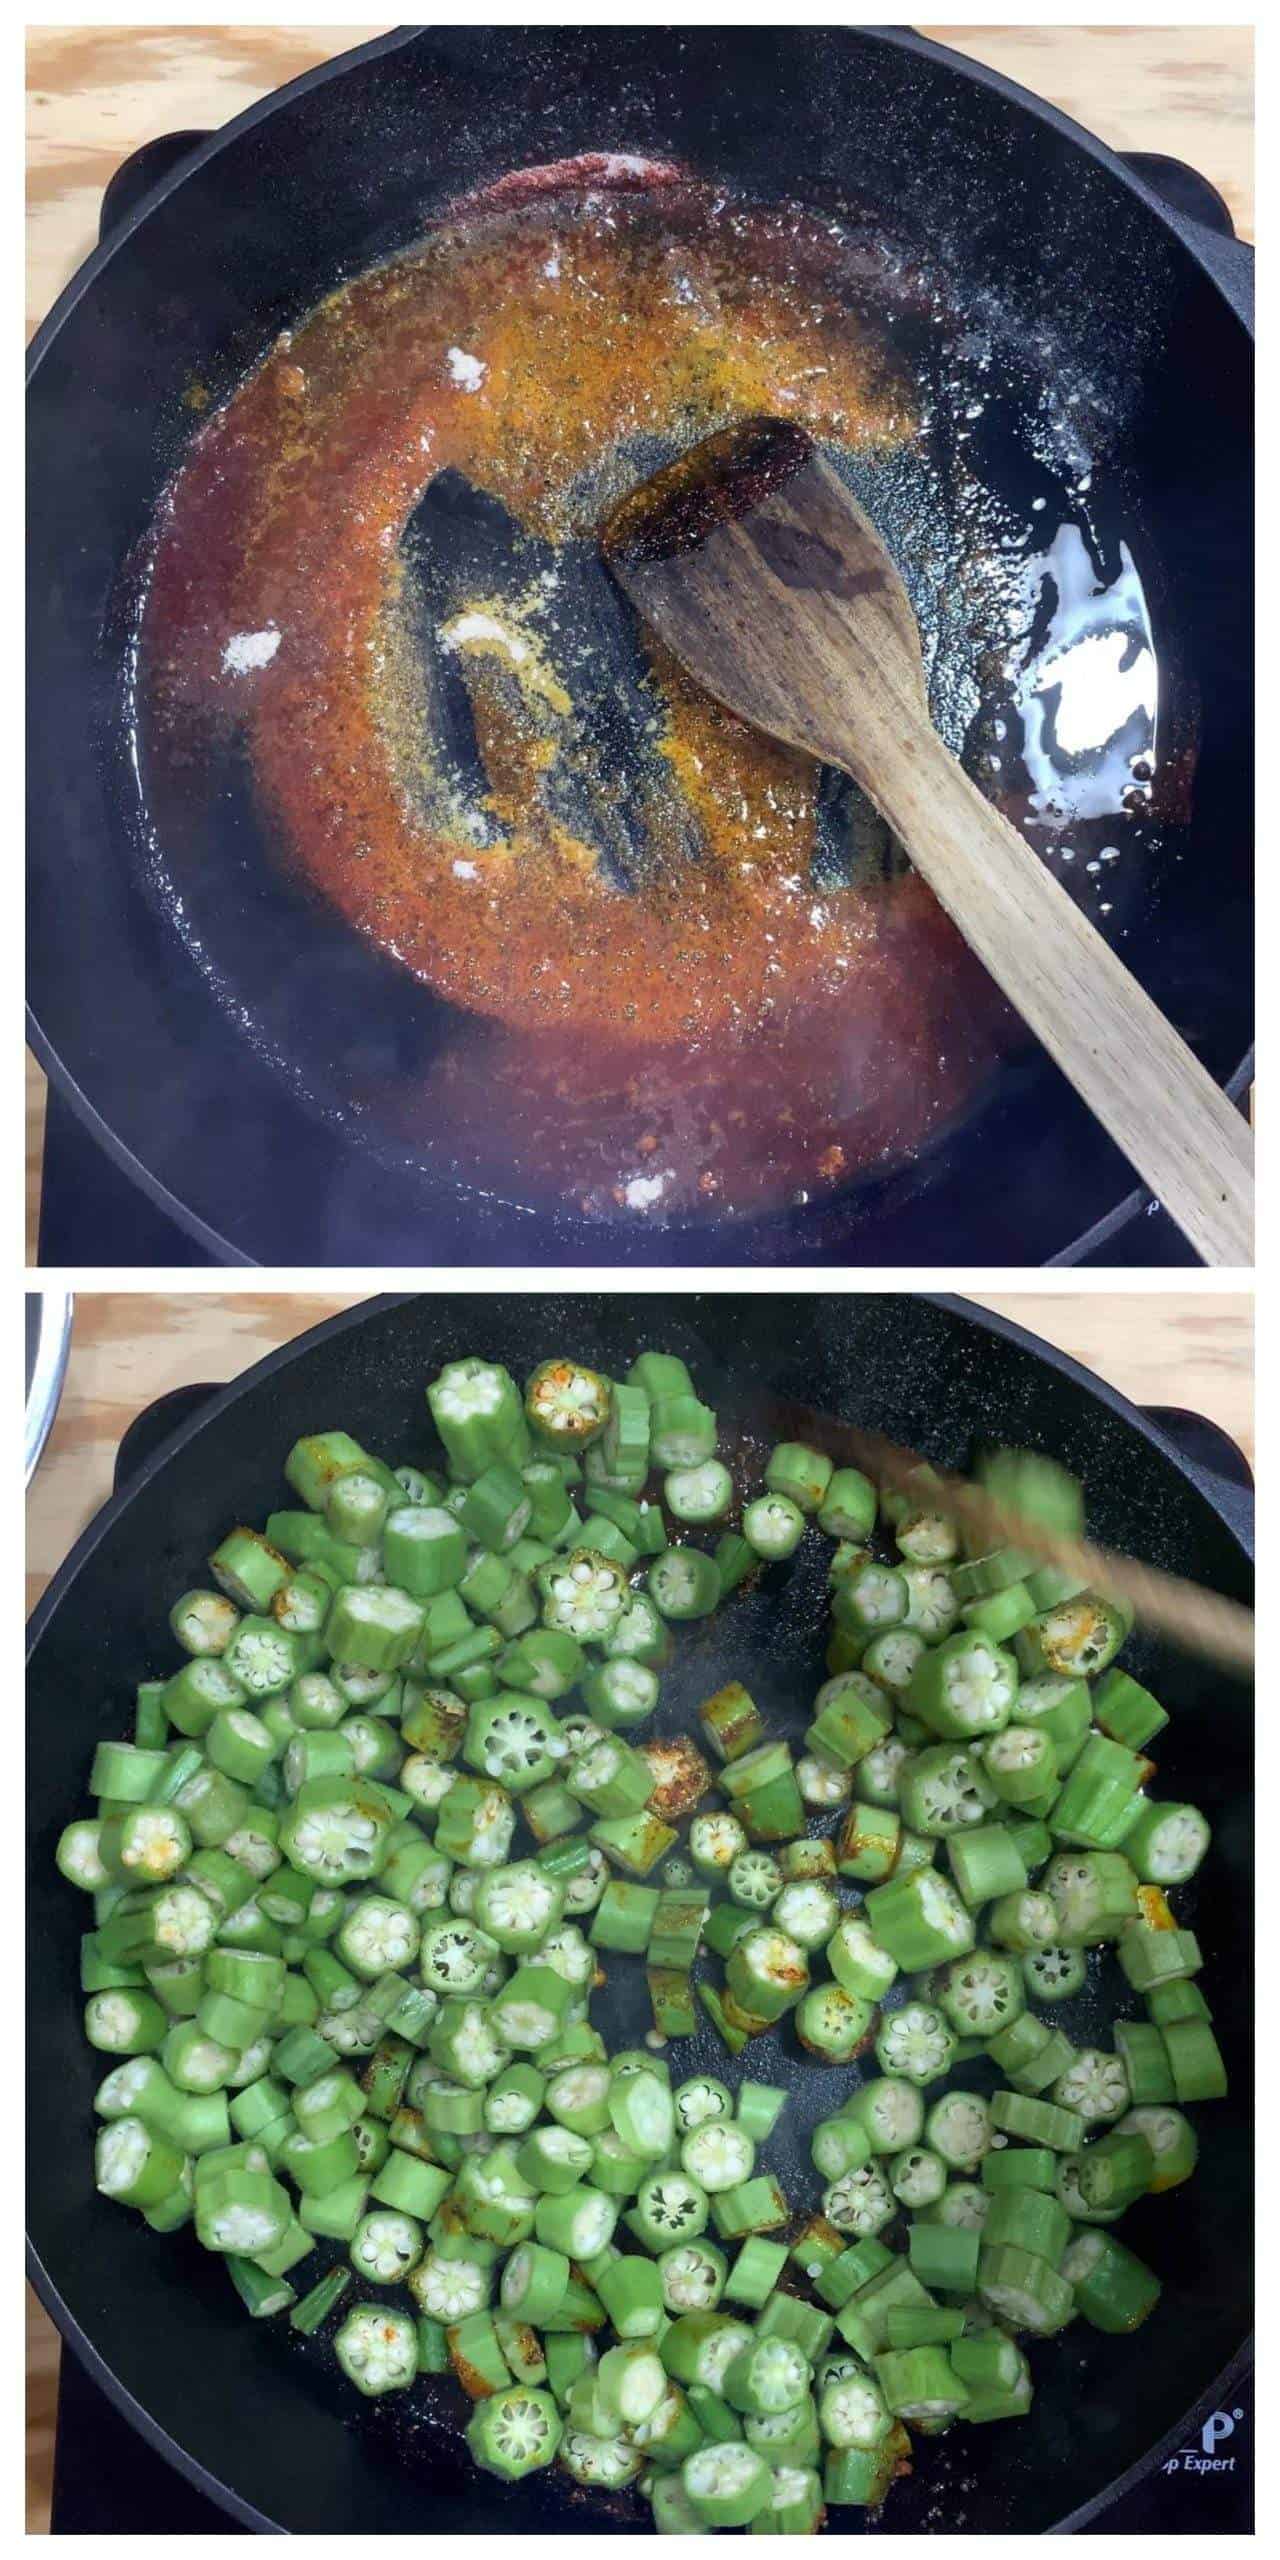 Frying the okra with spices